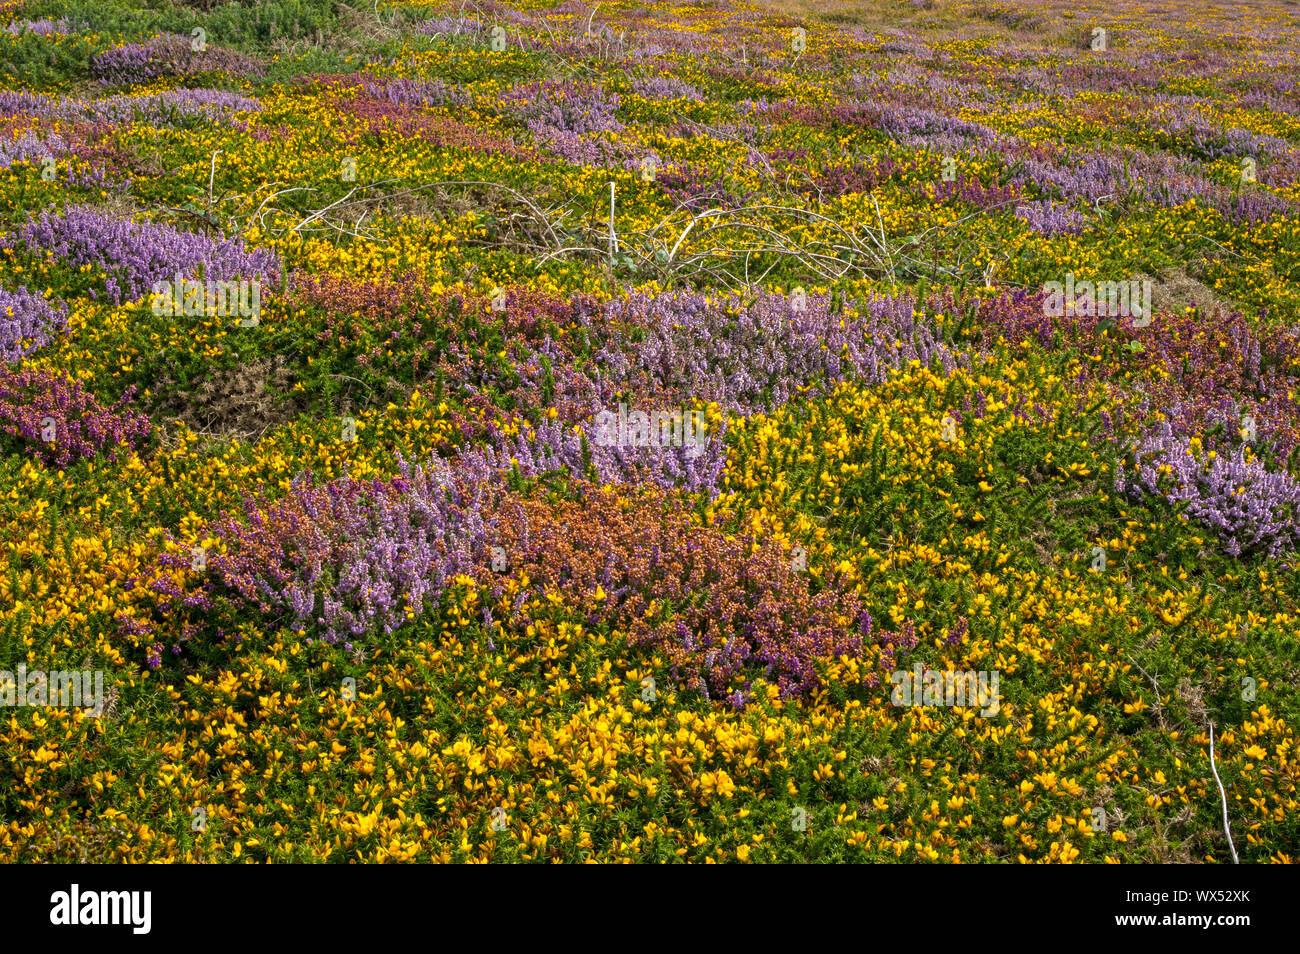 An area of coastal , dominated by heather and gorse, this is a declining habitat supportin a variety of birds, flowers and insects. Stock Photo